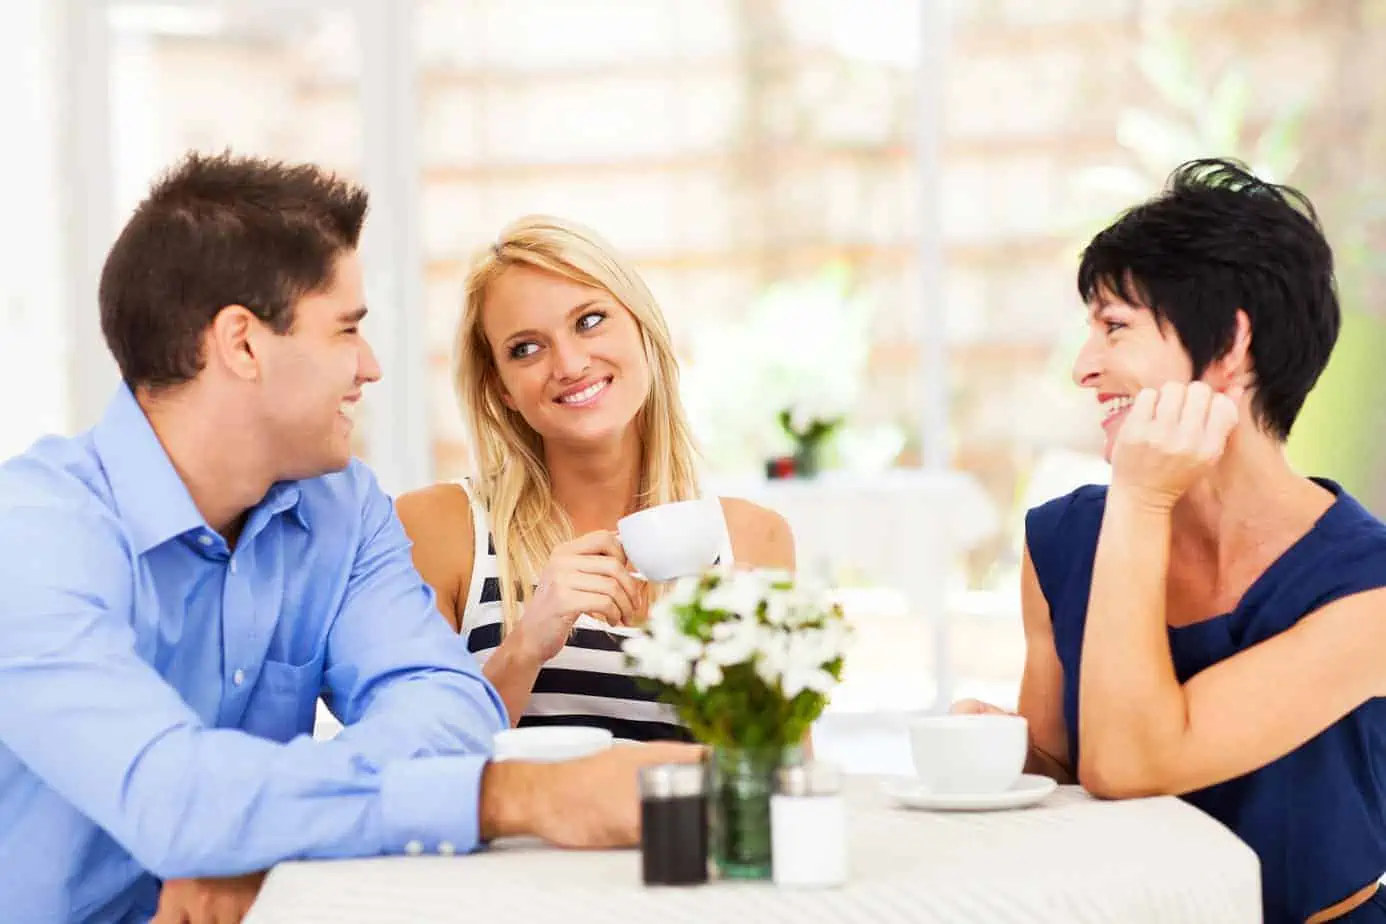 Three people sitting at a table having a conversation